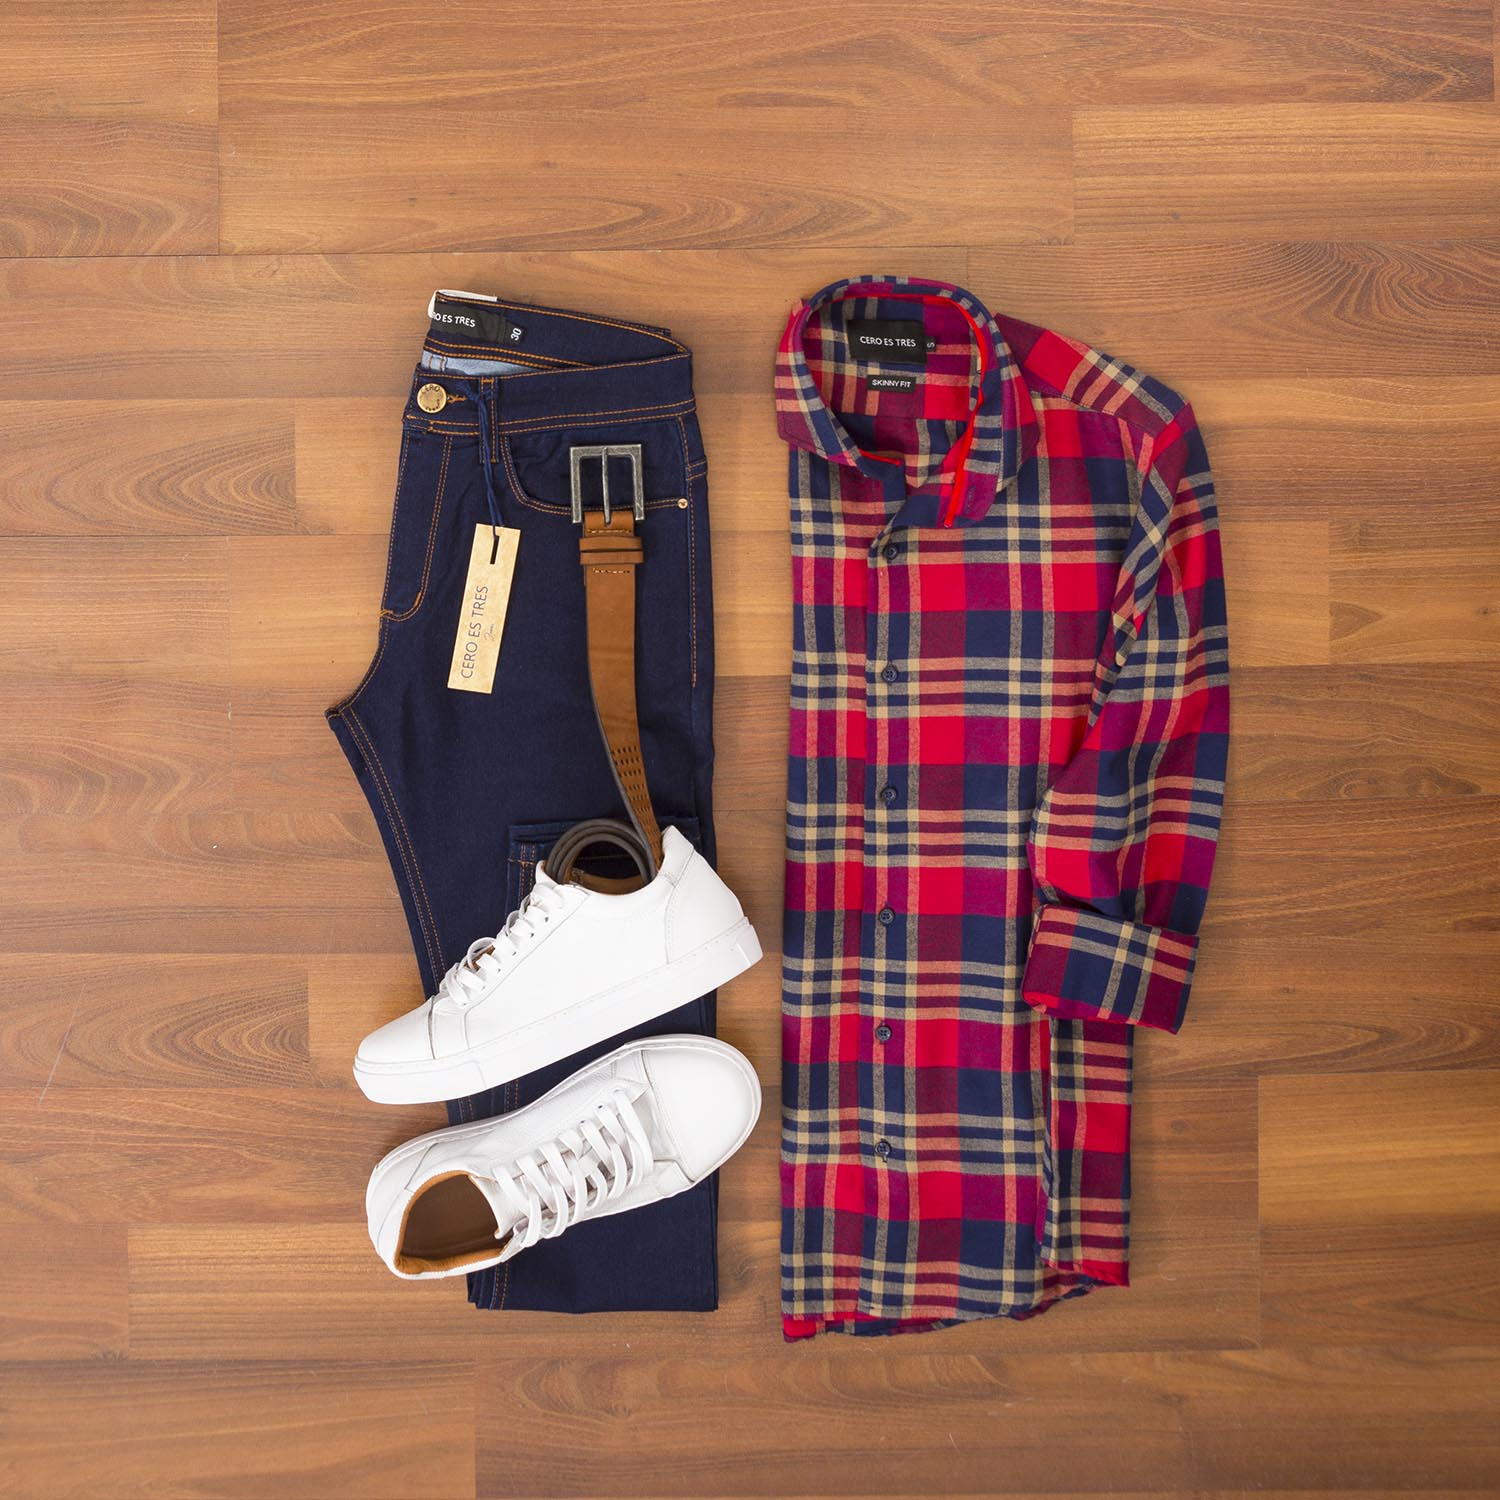 OUTFIT CERO 235